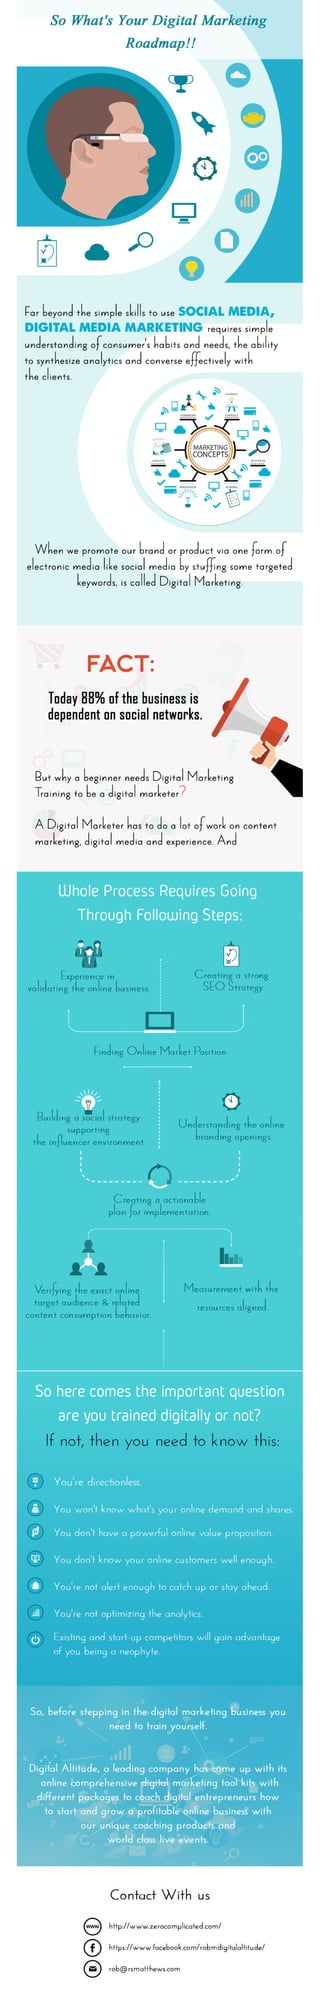 So what's your digital marketing roadmap!!